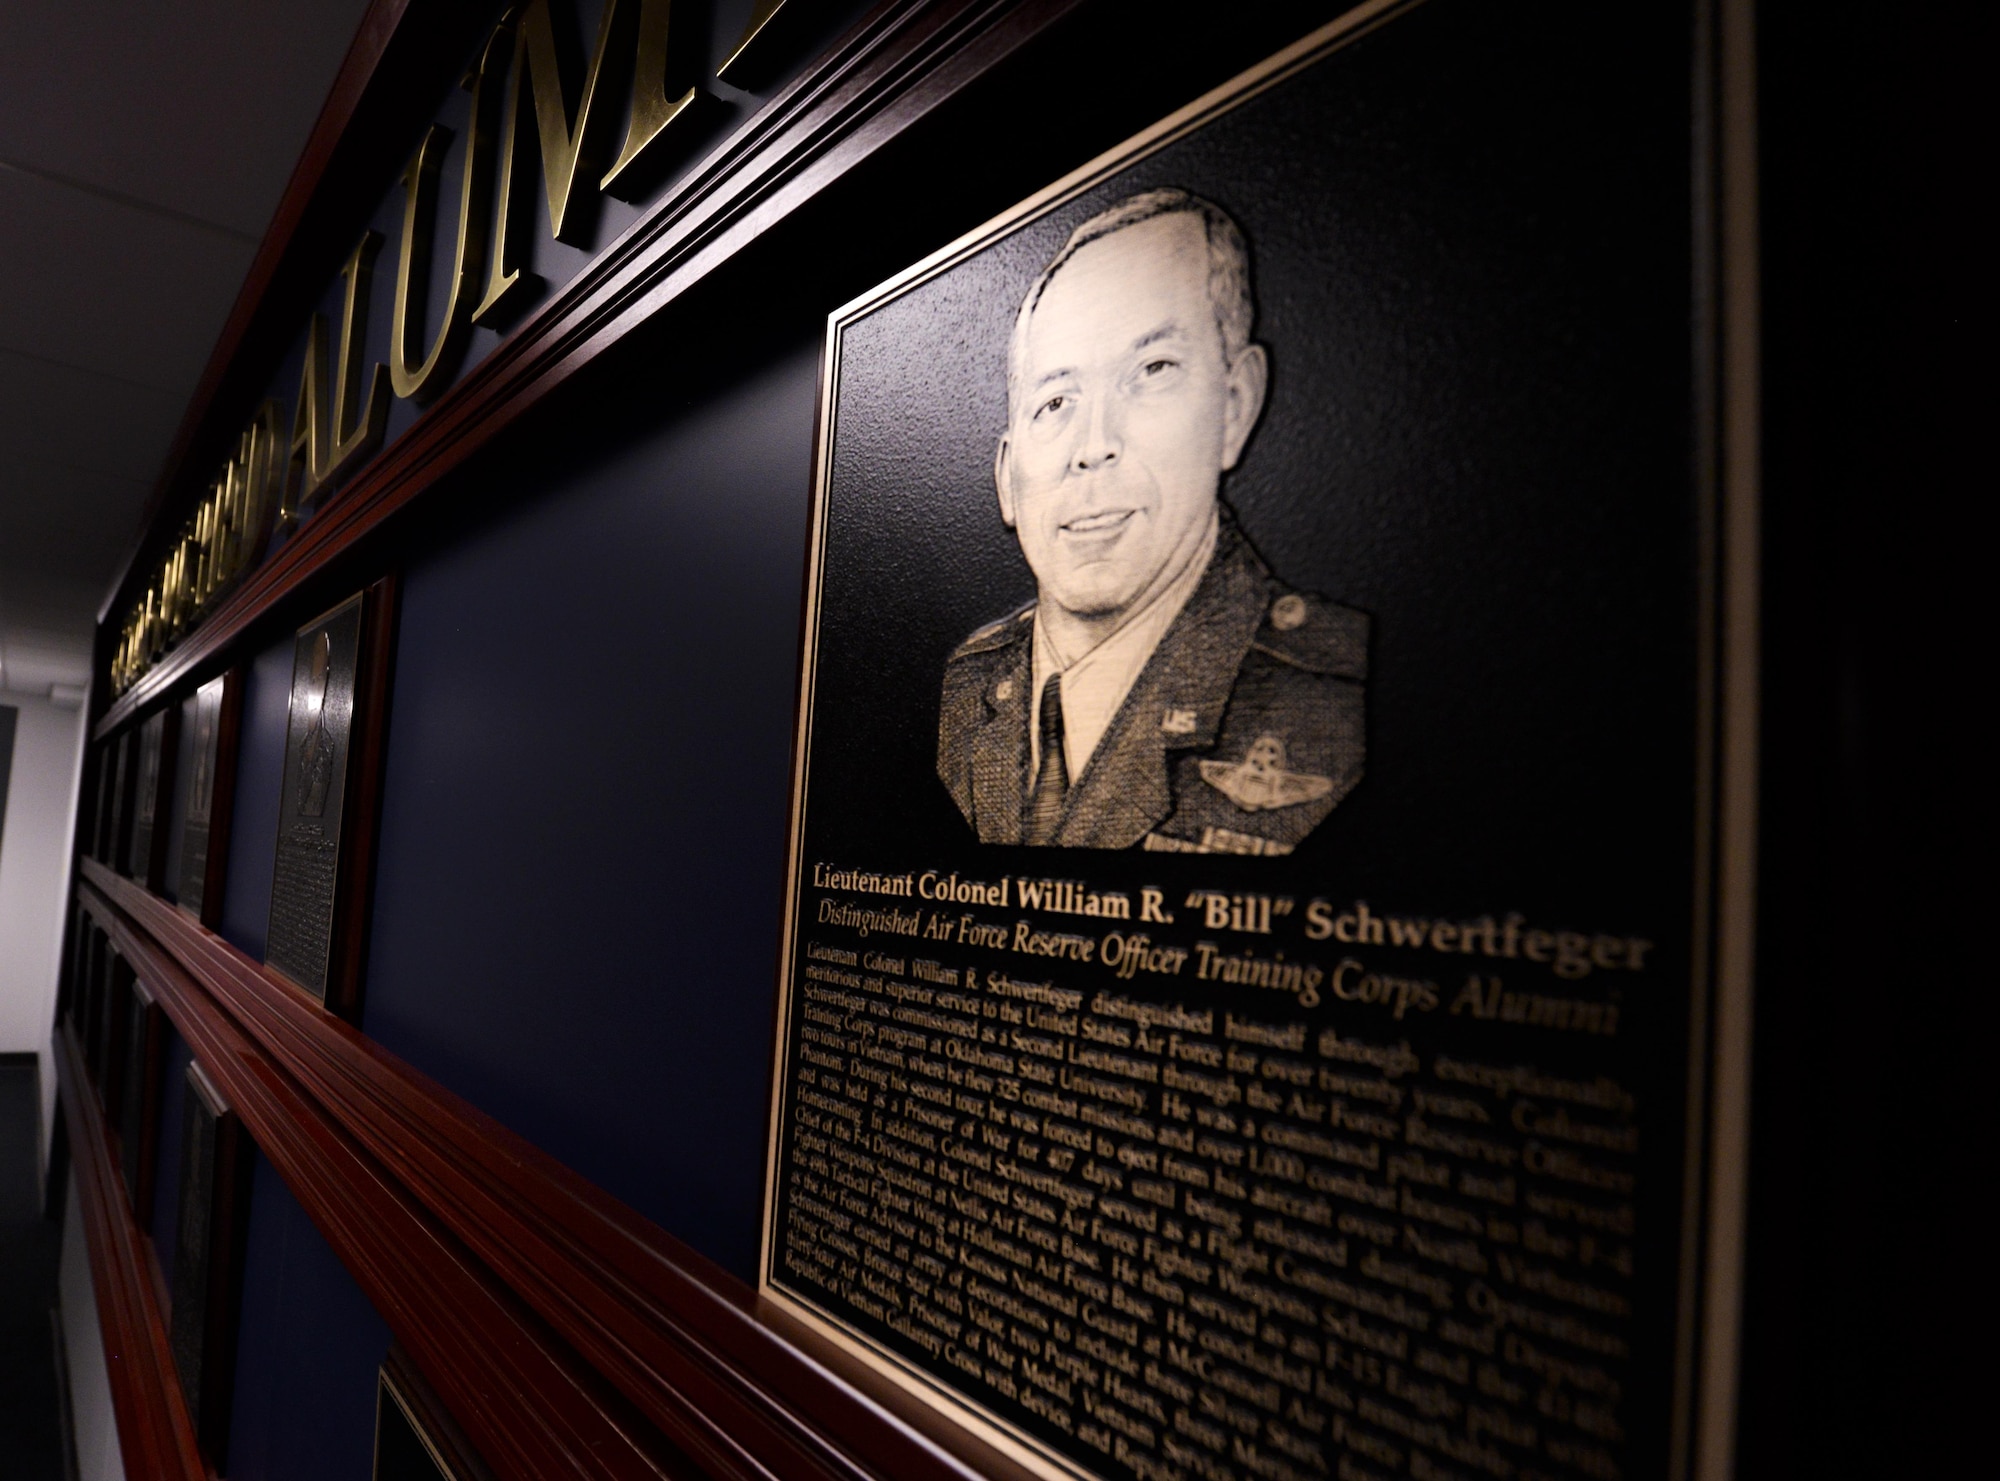 An engraved photo of retired Lt. Col. William Schwertfeger, 2016 Holm Center Distinguished Alumni inductee, hangs on display besides the previous honorees on the Distinguished Alumni wall inside the Air Force Reserve Officer Training Corps Headquarters, August 18, 2006, Maxwell Air Force Base, Ala. The Distinguished Alumni program honors graduates who achieved a high level of success during or after their service in the Air Force. (U.S. Air Force photo/ SrA Alexa Culbert) 